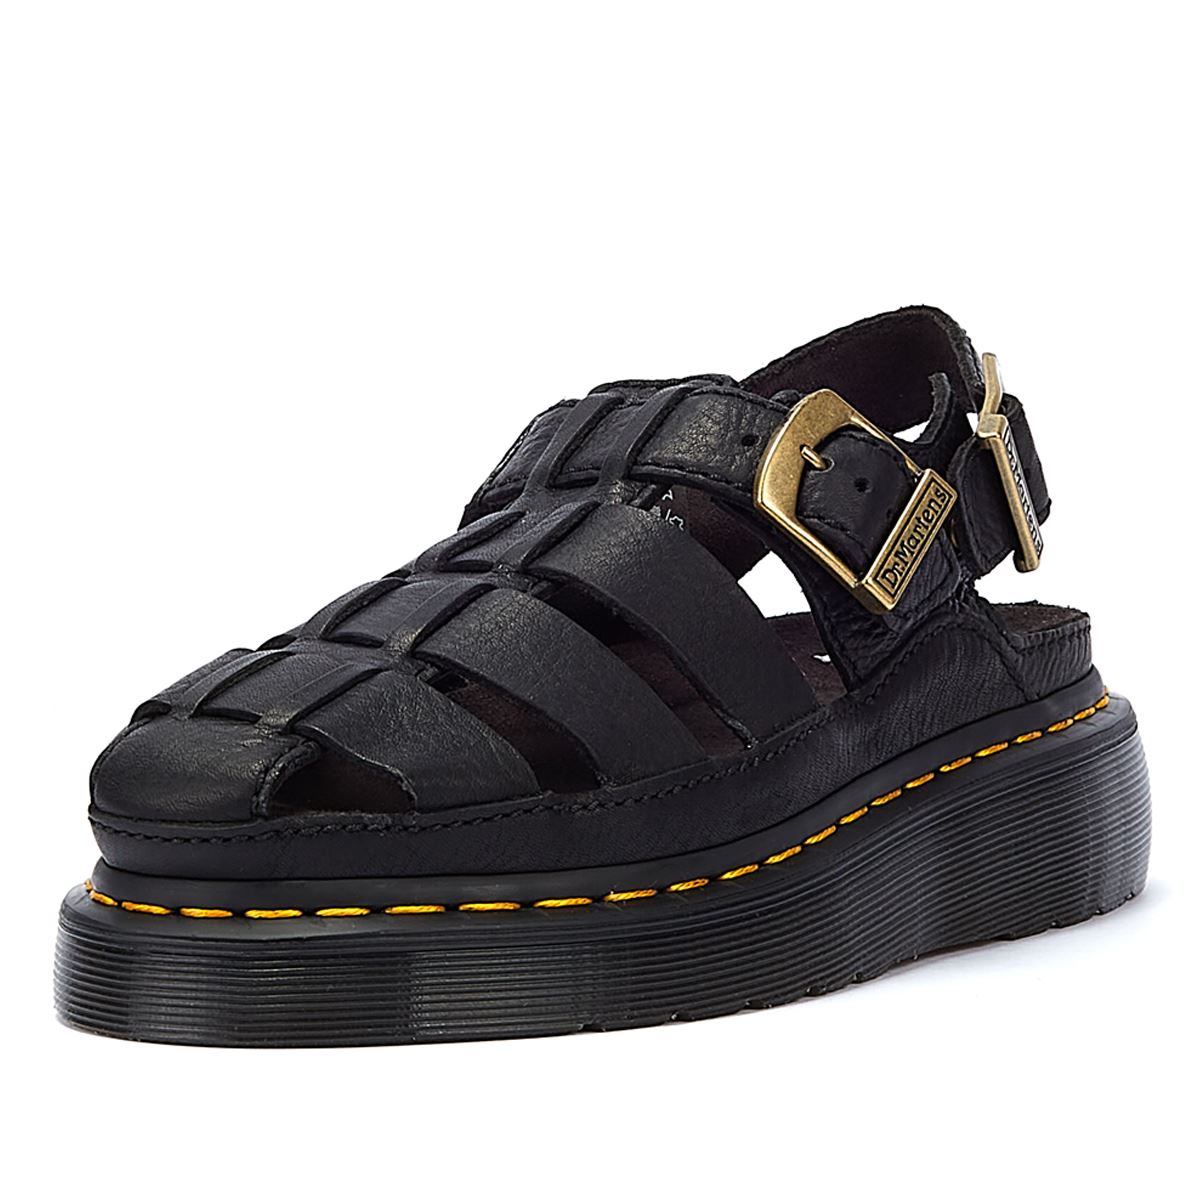 Dr. Martens Fisherman Grizzly Women’s Black Sandals - Boot And Bag UK